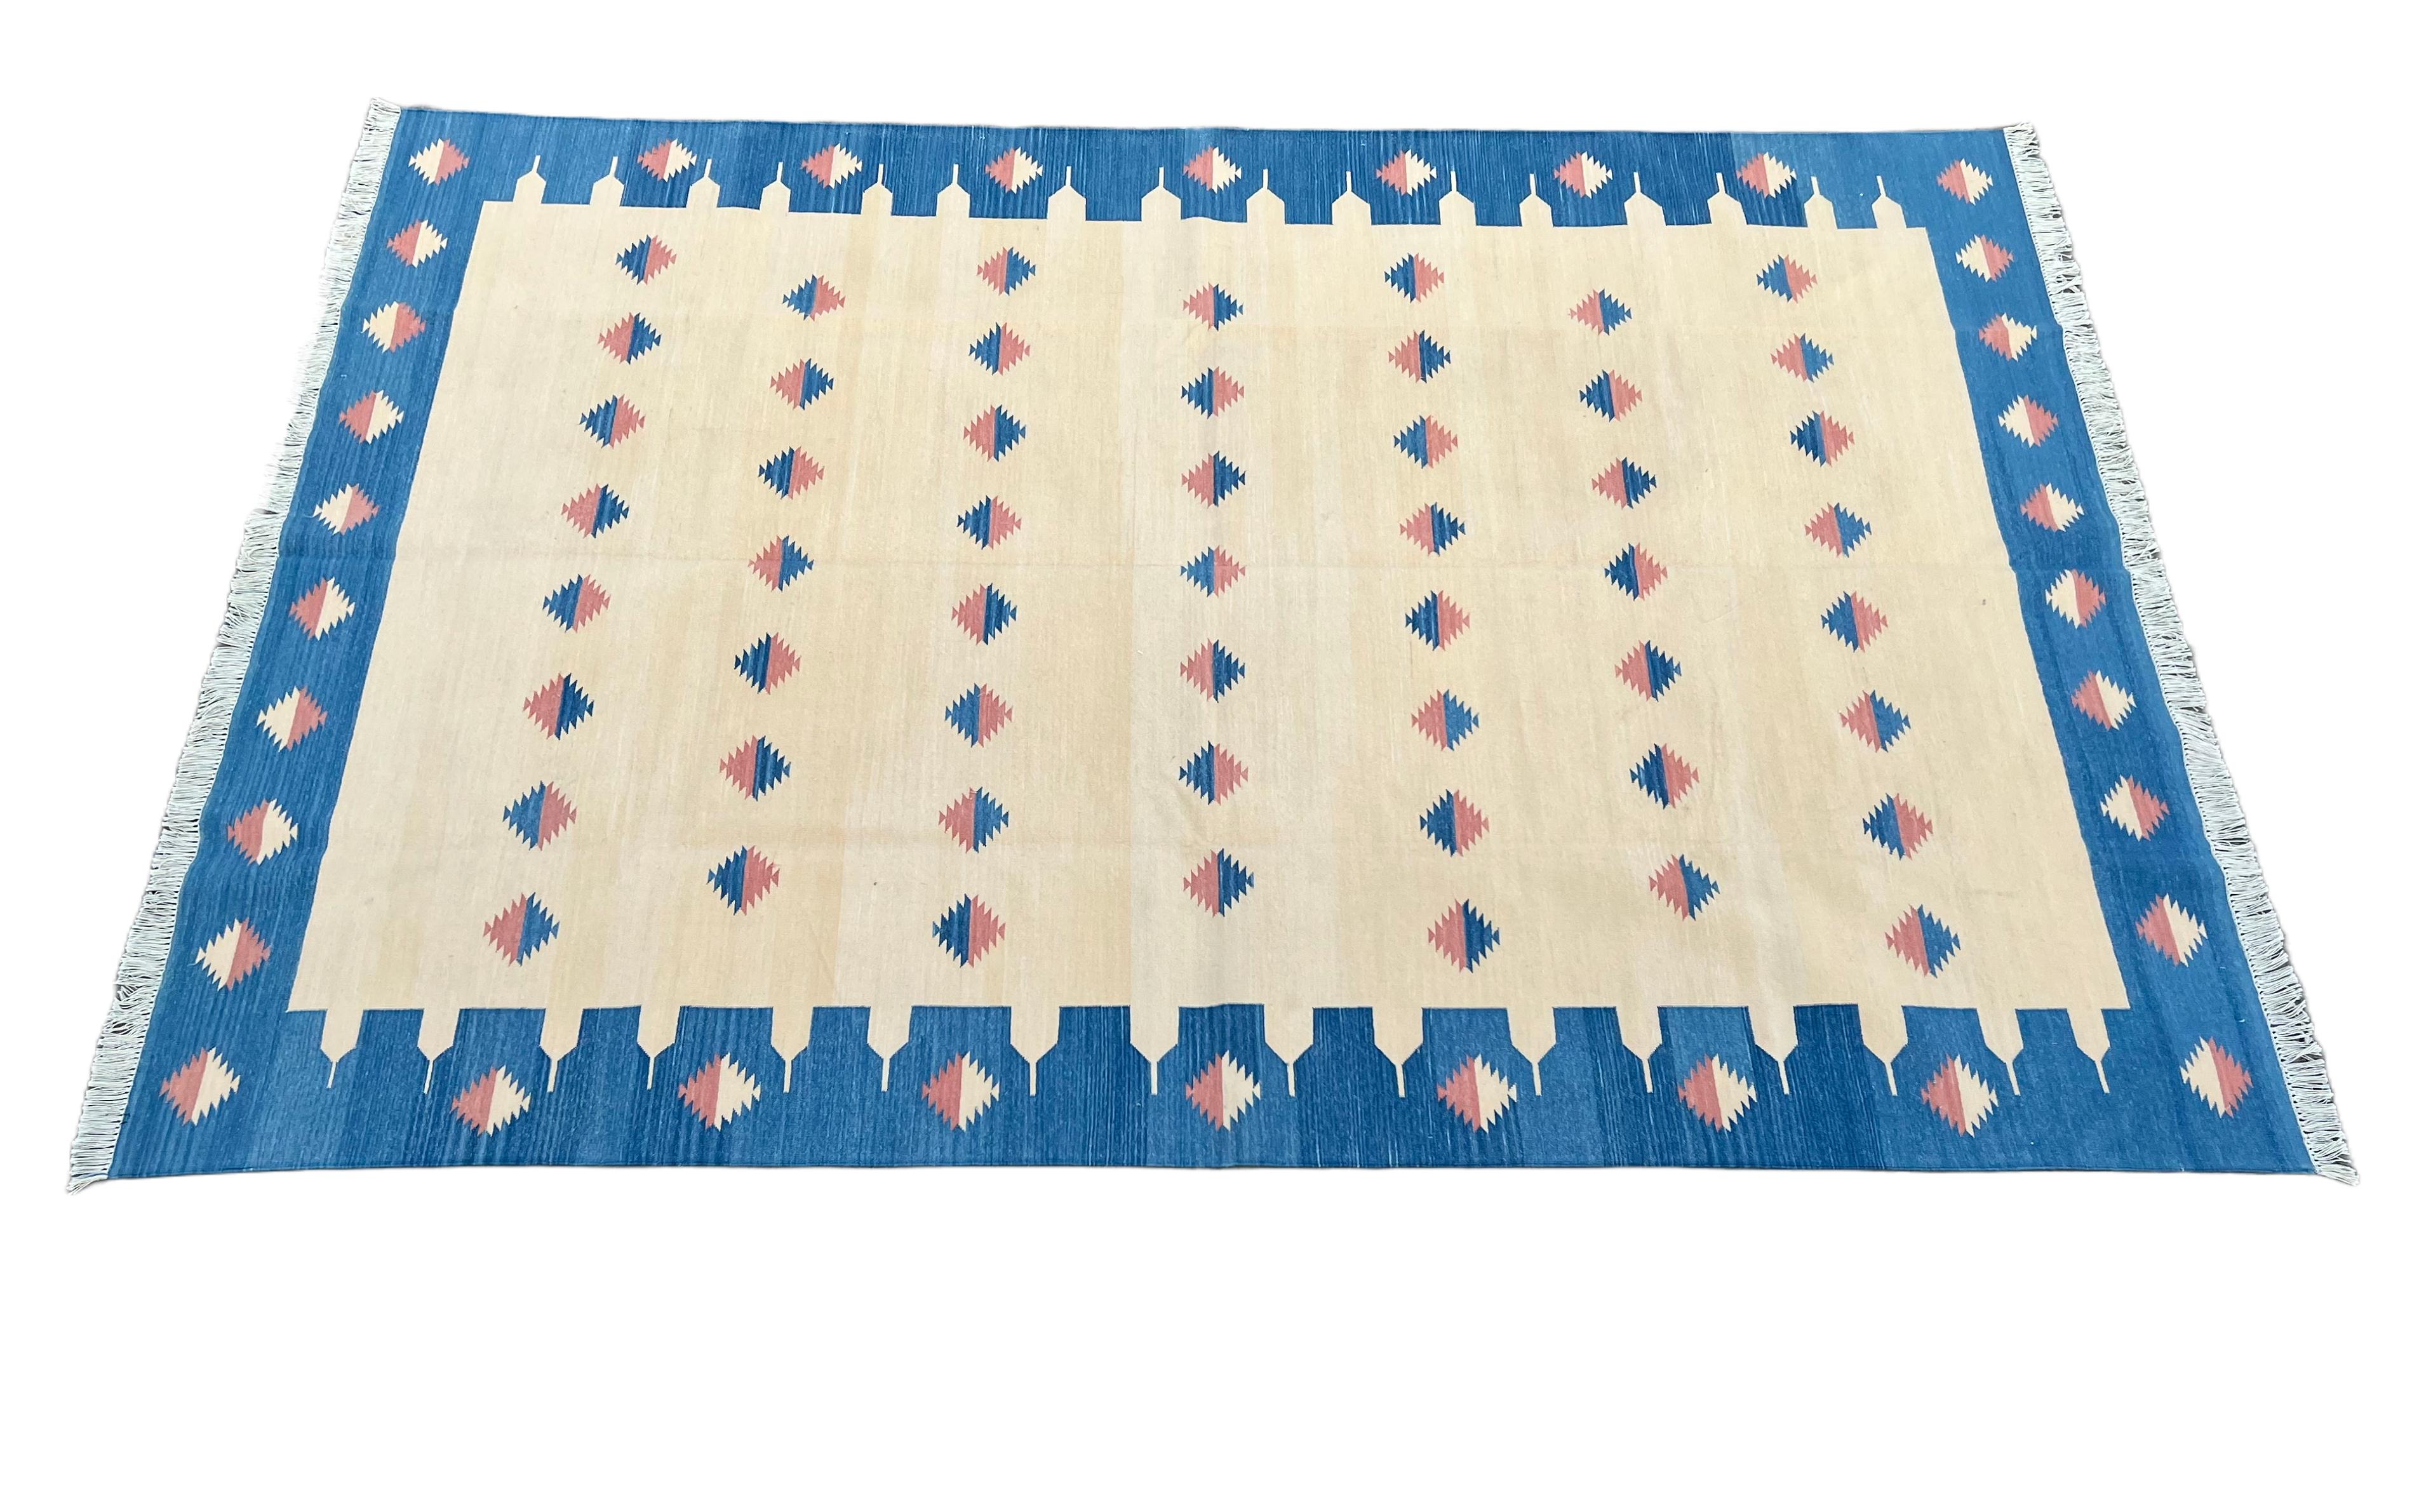 Cotton Vegetable Dyed Cream, Coral And Blue Diamond Indian Dhurrie Rug-6'x9'

These special flat-weave dhurries are hand-woven with 15 ply 100% cotton yarn. Due to the special manufacturing techniques used to create our rugs, the size and color of